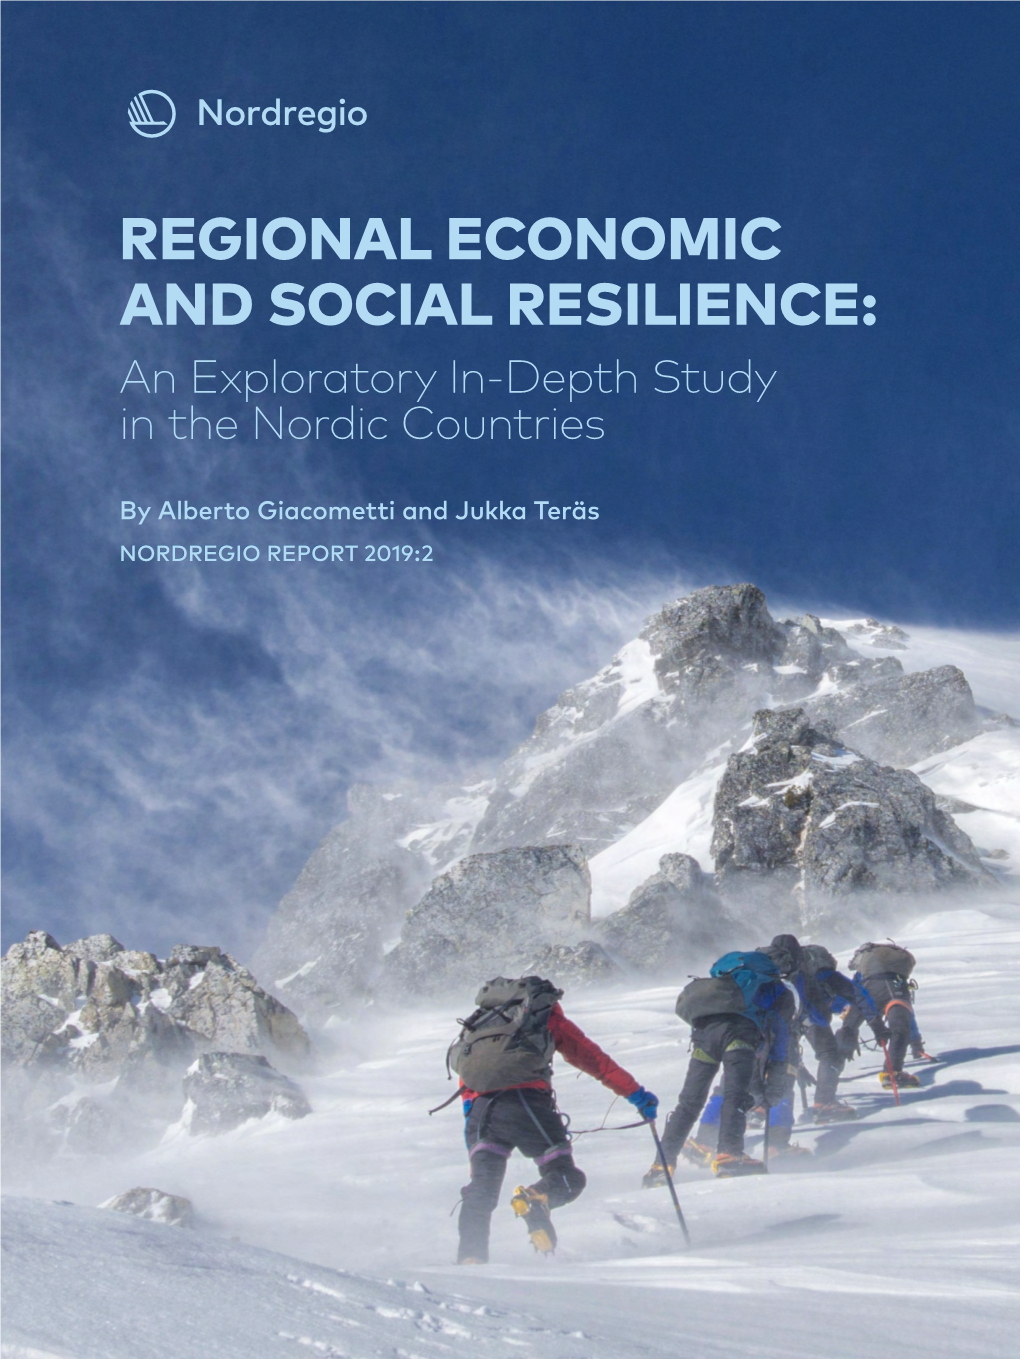 REGIONAL ECONOMIC and SOCIAL RESILIENCE: an Exploratory In-Depth Study in the Nordic Countries